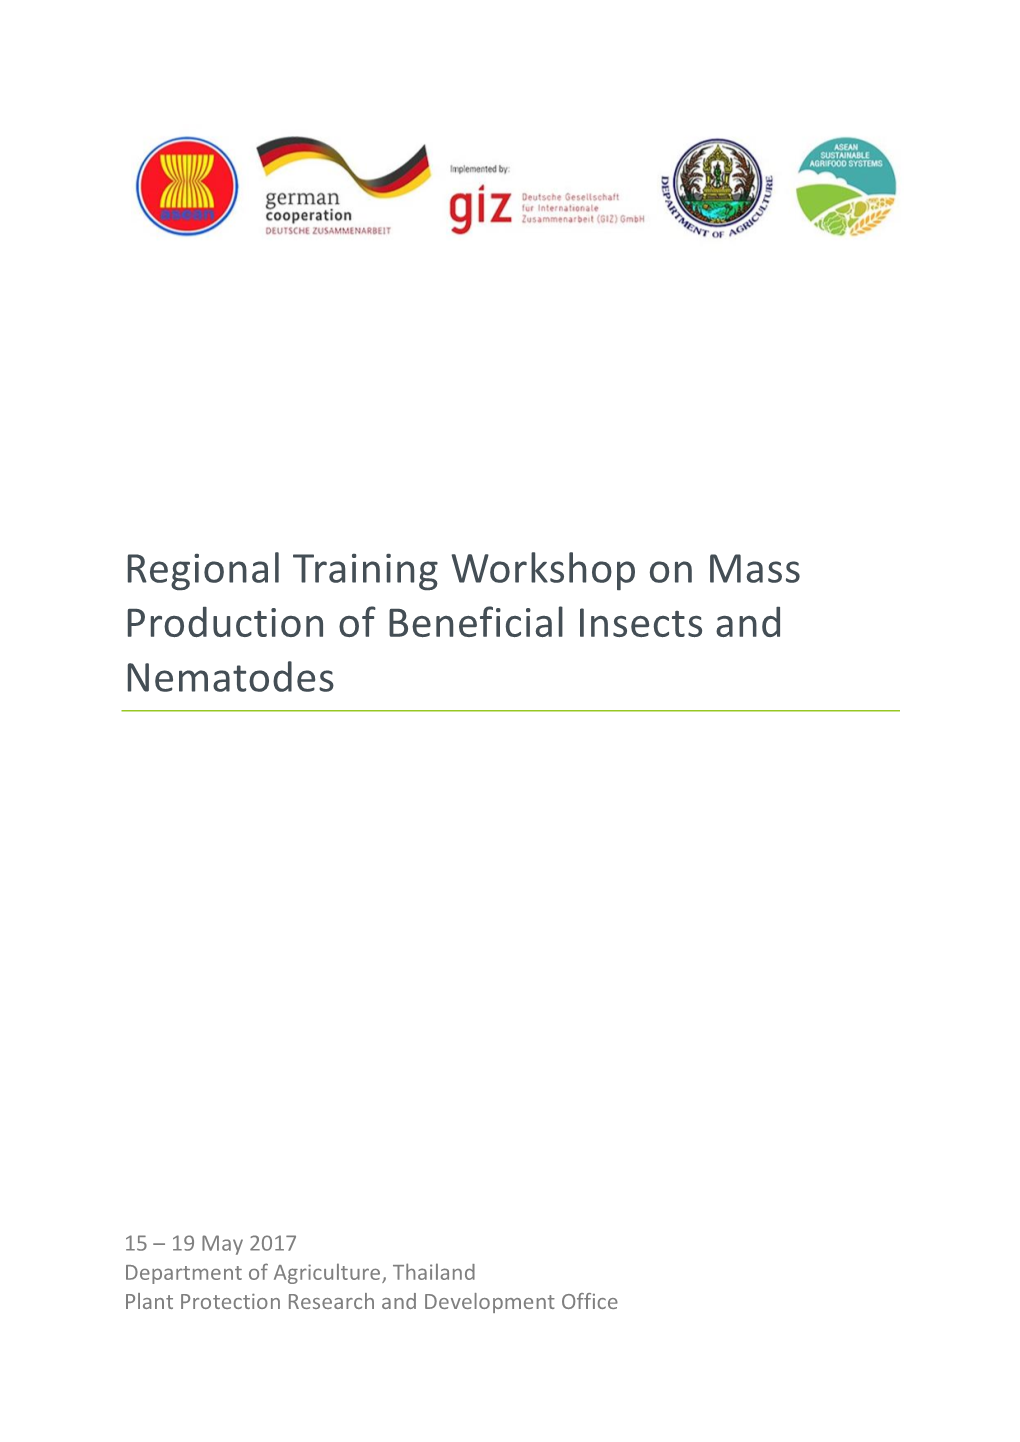 Regional Training Workshop on Mass Production of Beneficial Insects and Nematodes